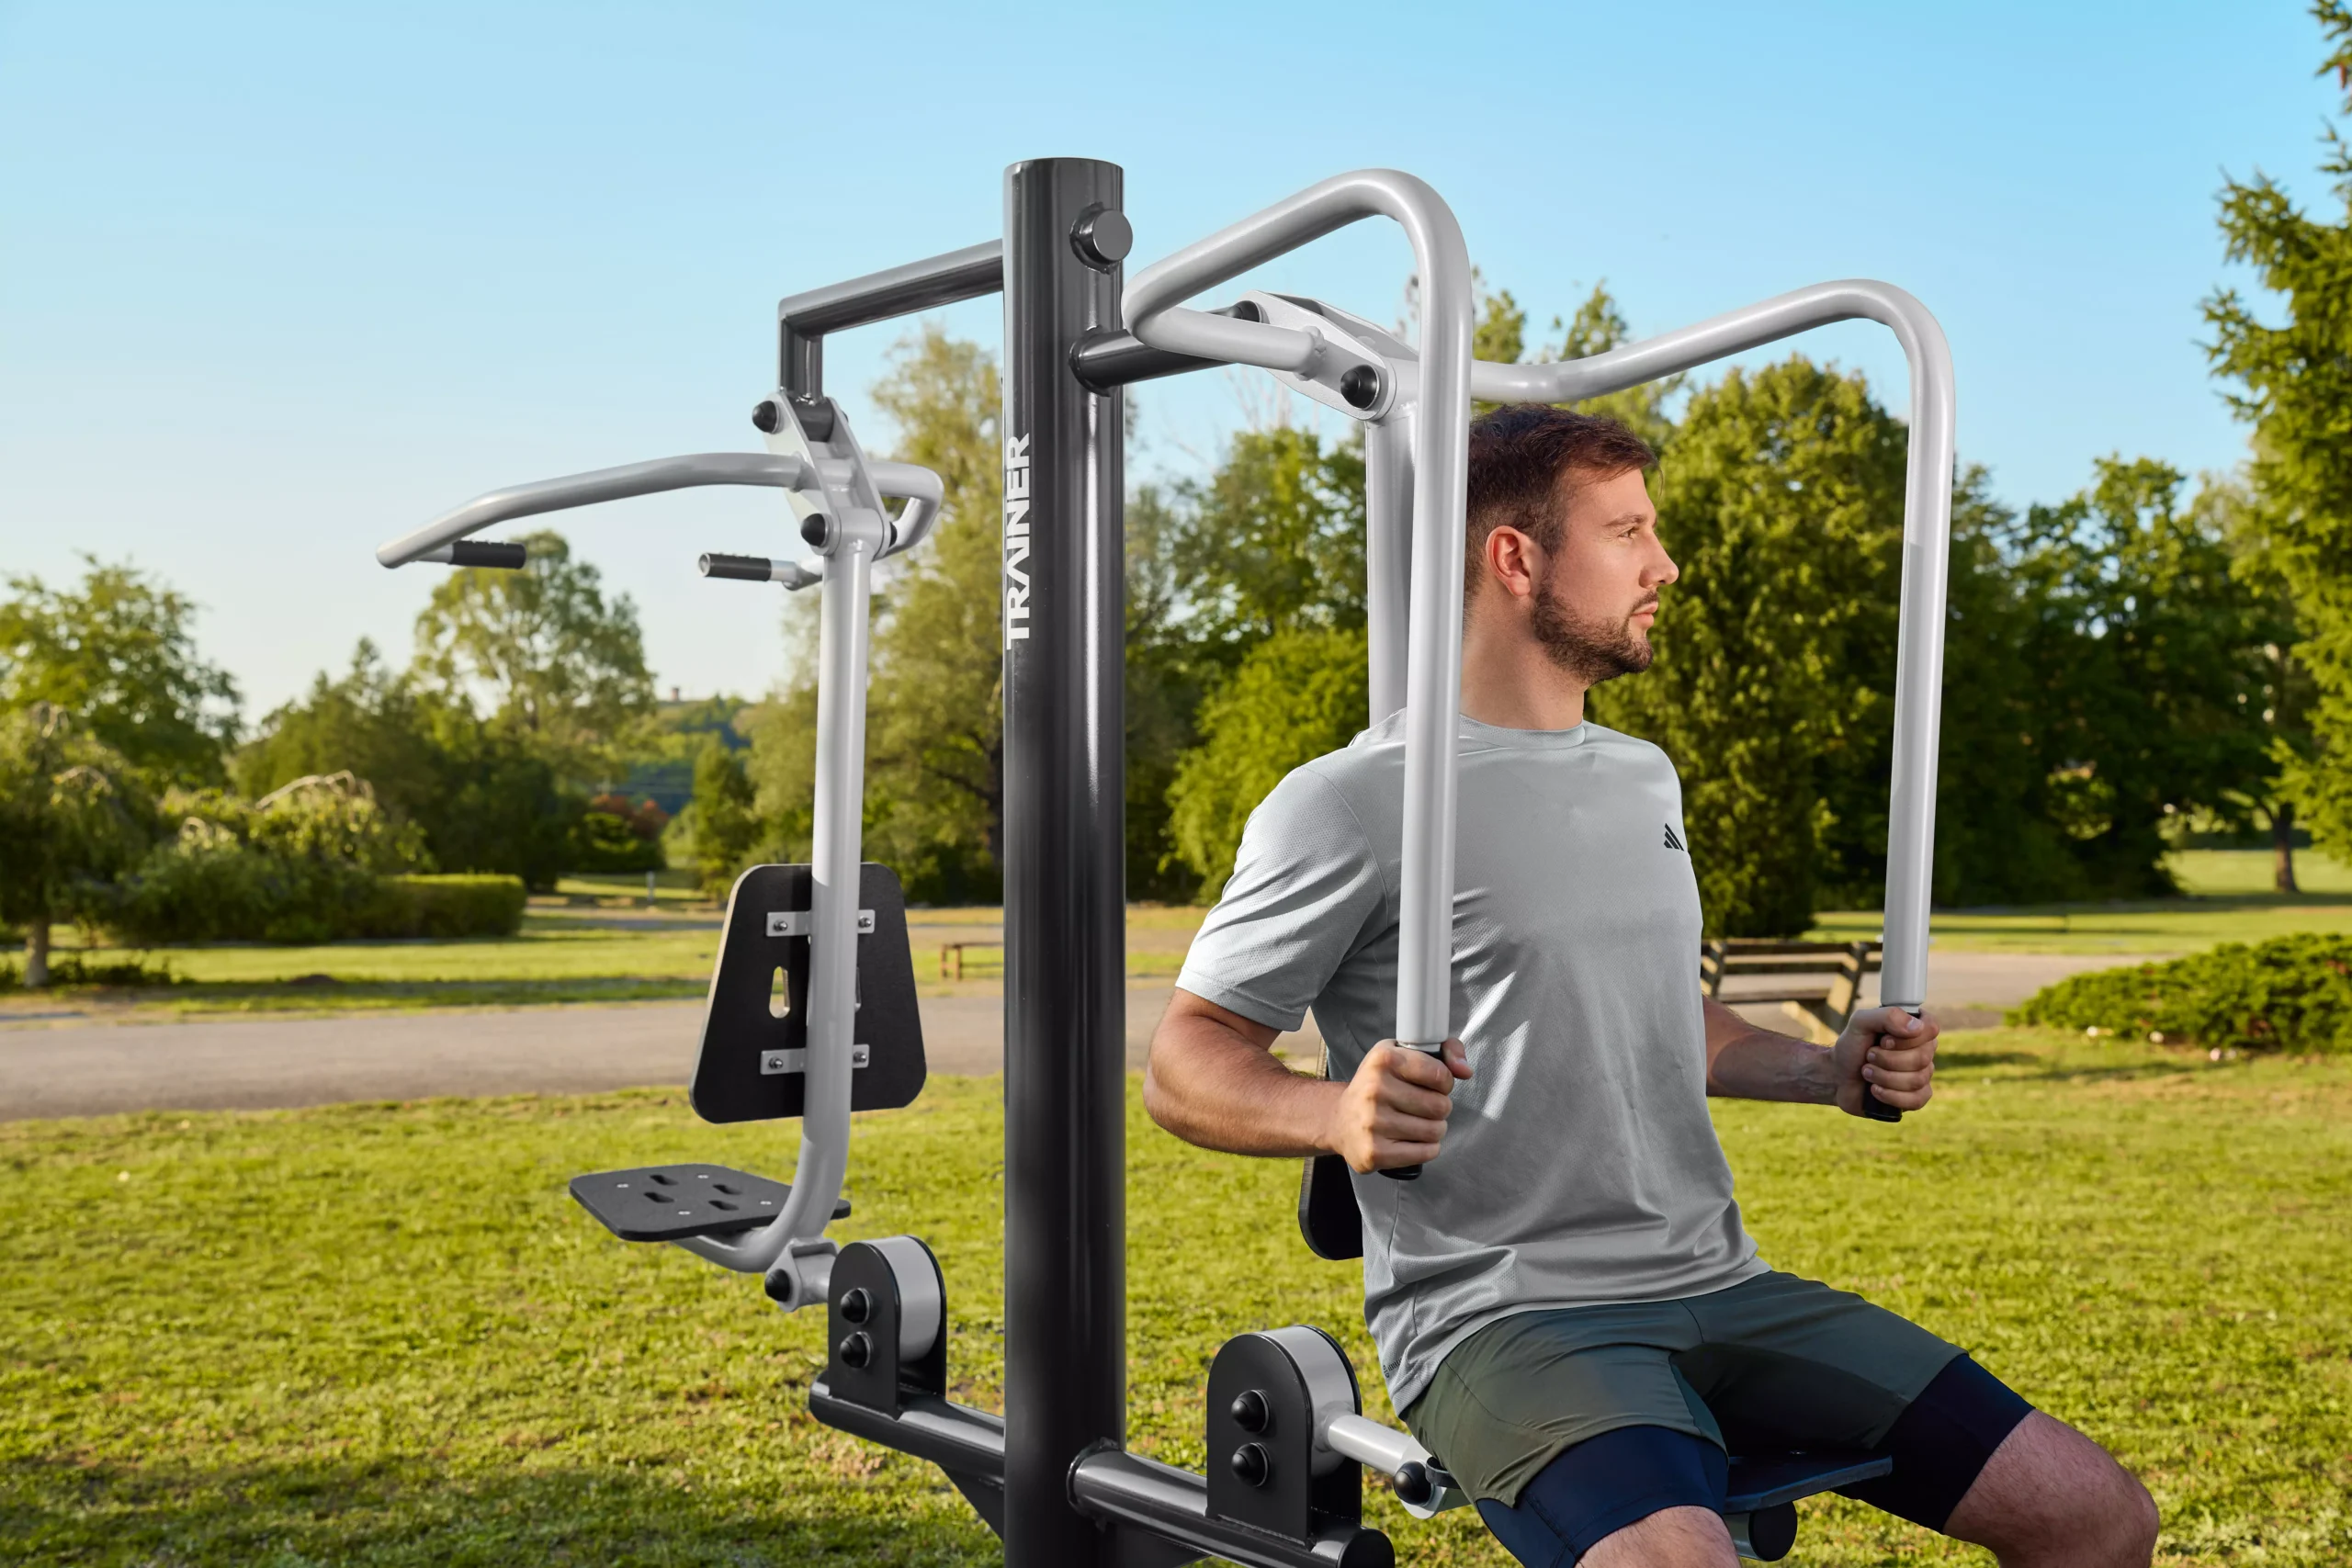 Outdoor Gym, Fitness Equipment & Street Workout Parks